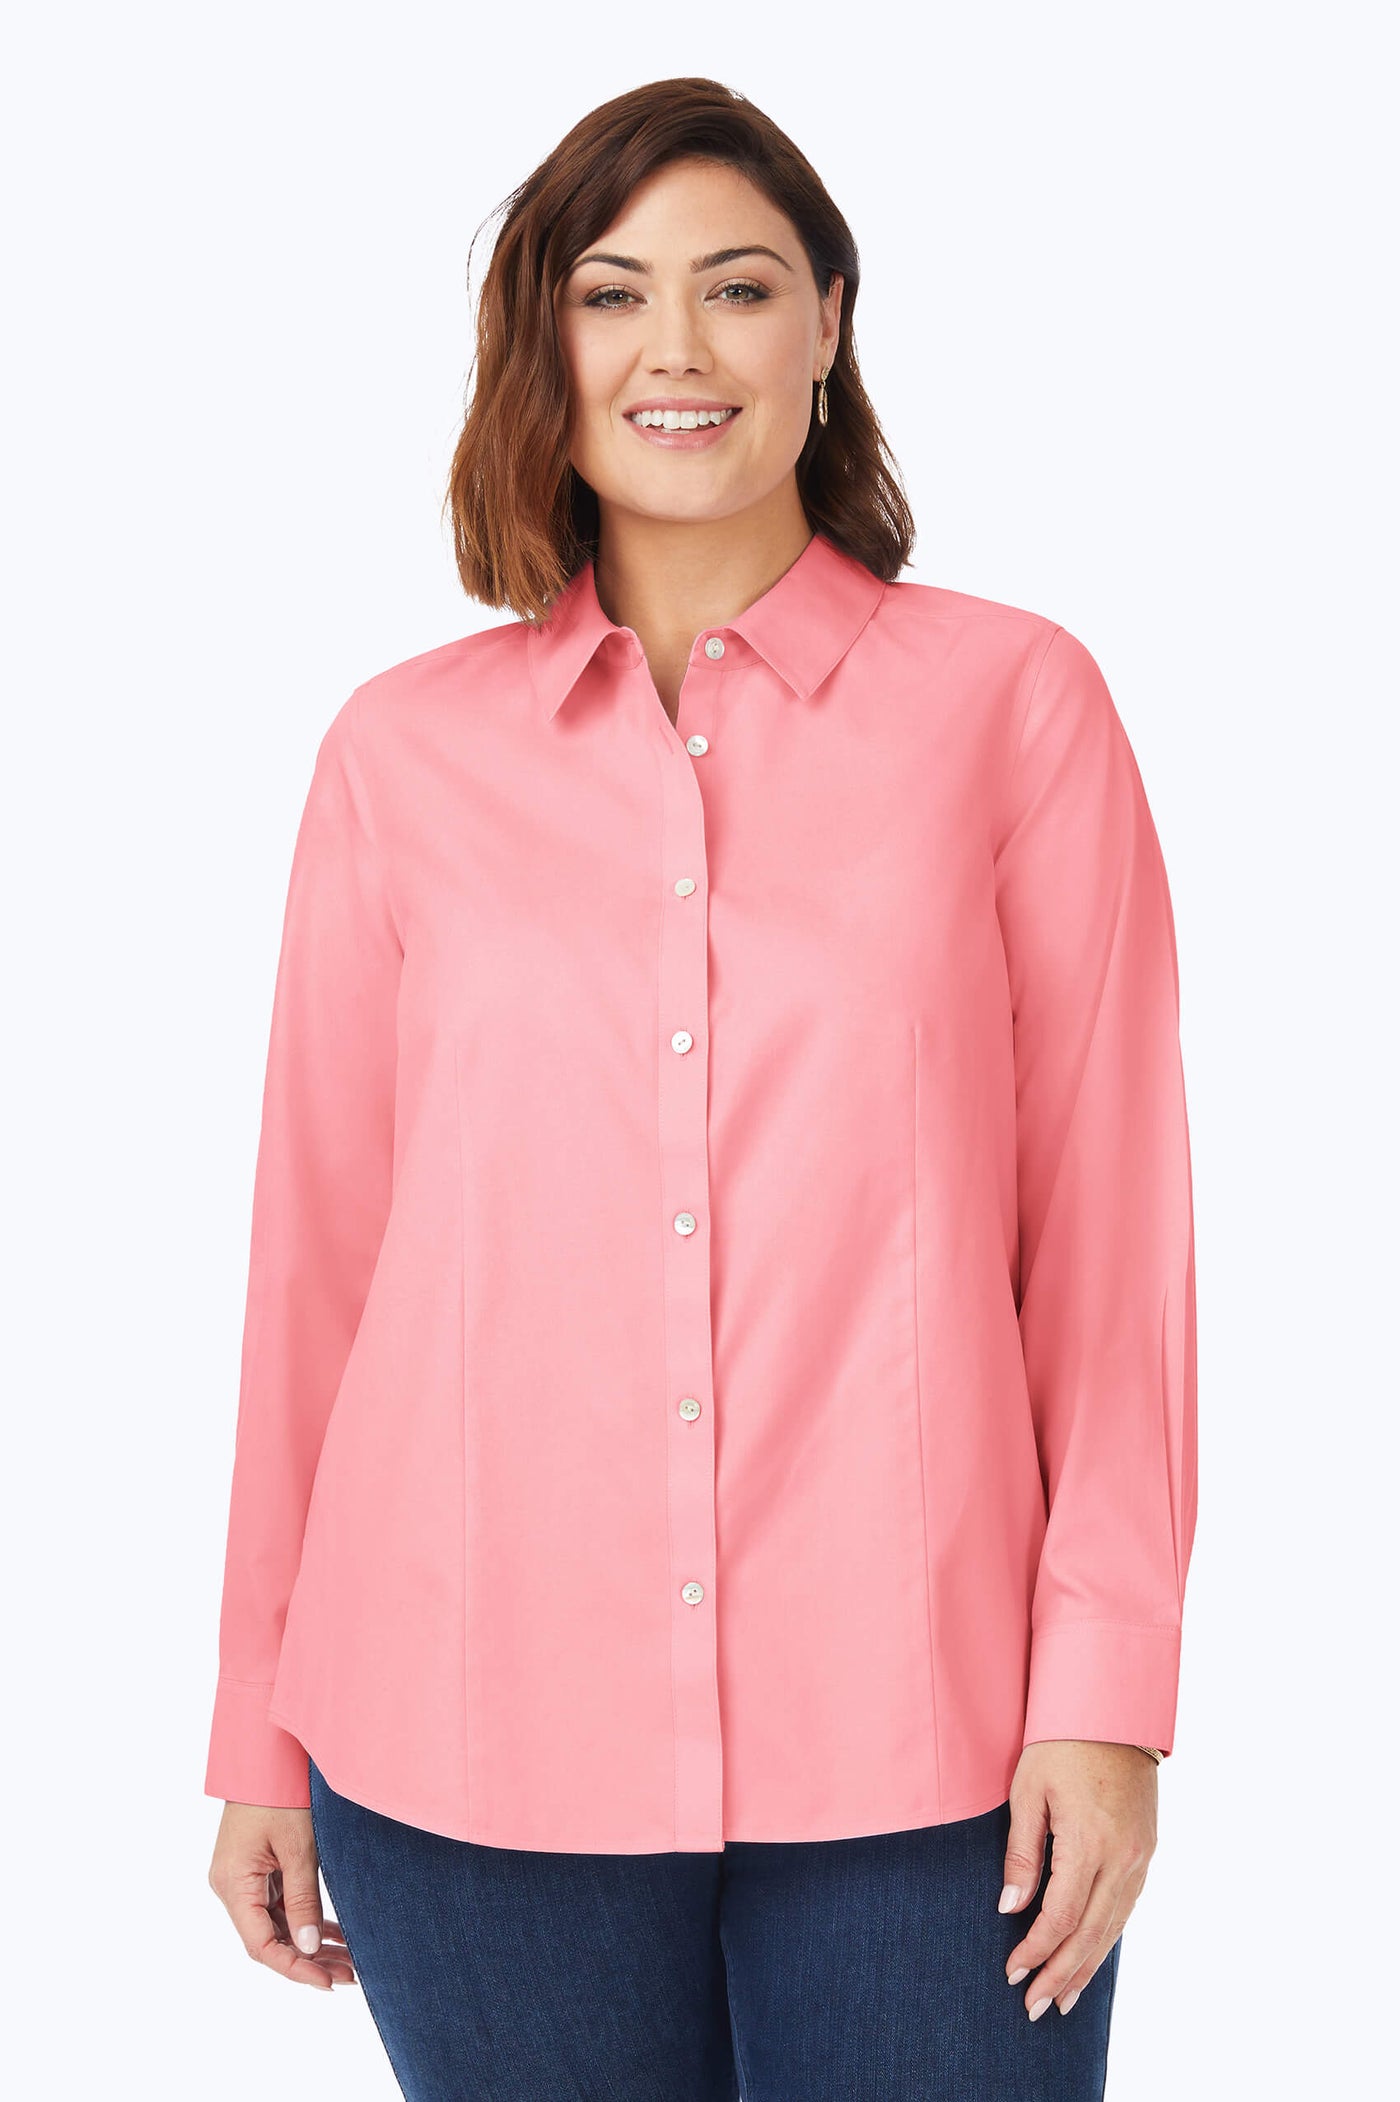 Dianna Plus Essential Pinpoint Non-Iron Shirt #color_pink peach